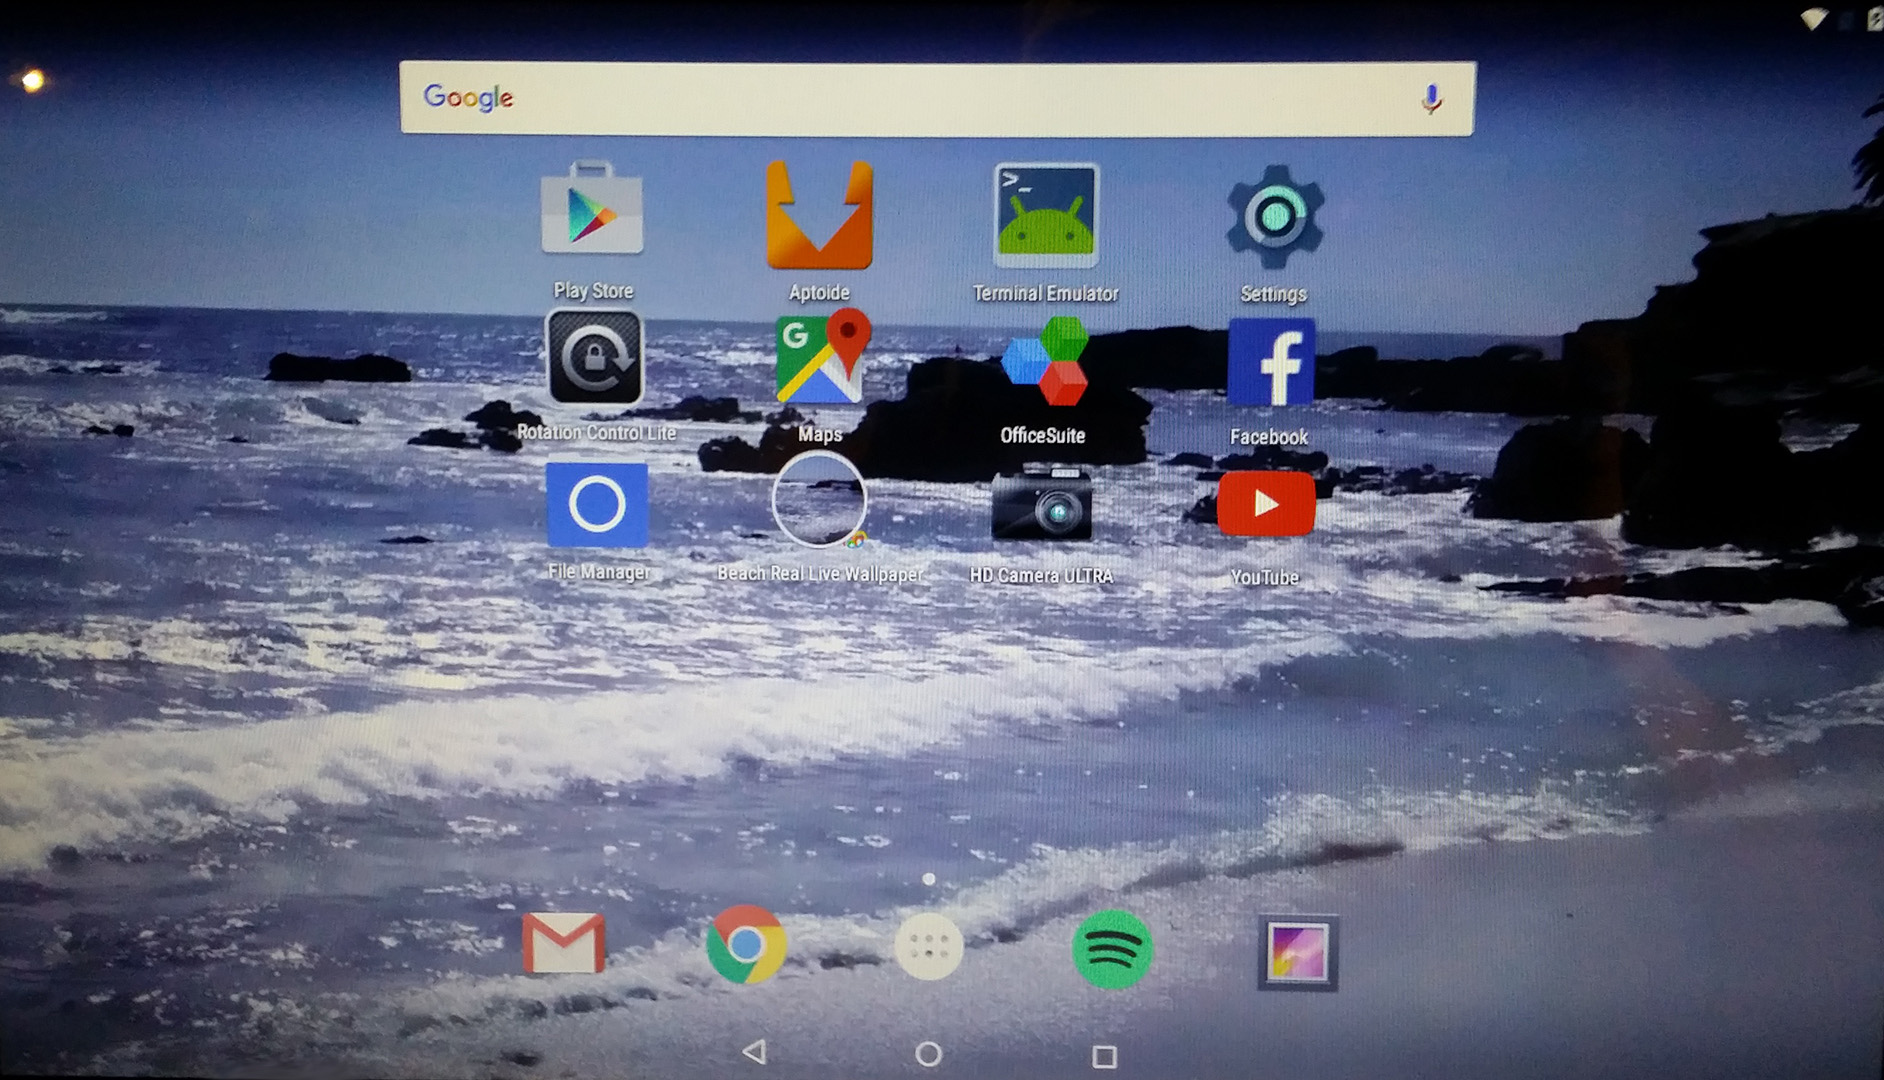 Android 6.0 Marshmallow lands on your PC using Android-x86 6.0-rc1 1